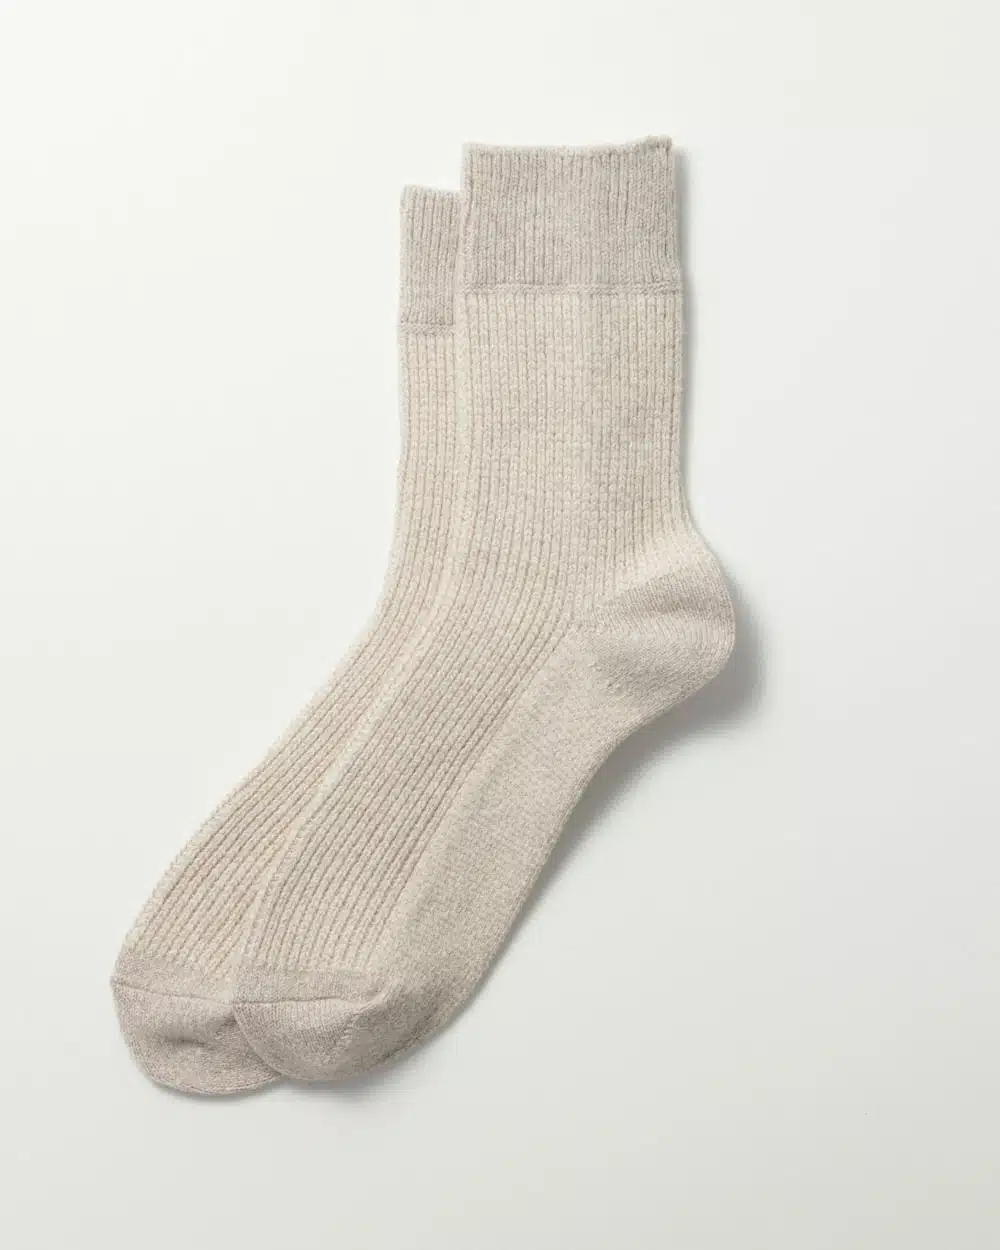 RoToTo Wool Daily 3 Pack Socks - Grey/Off White